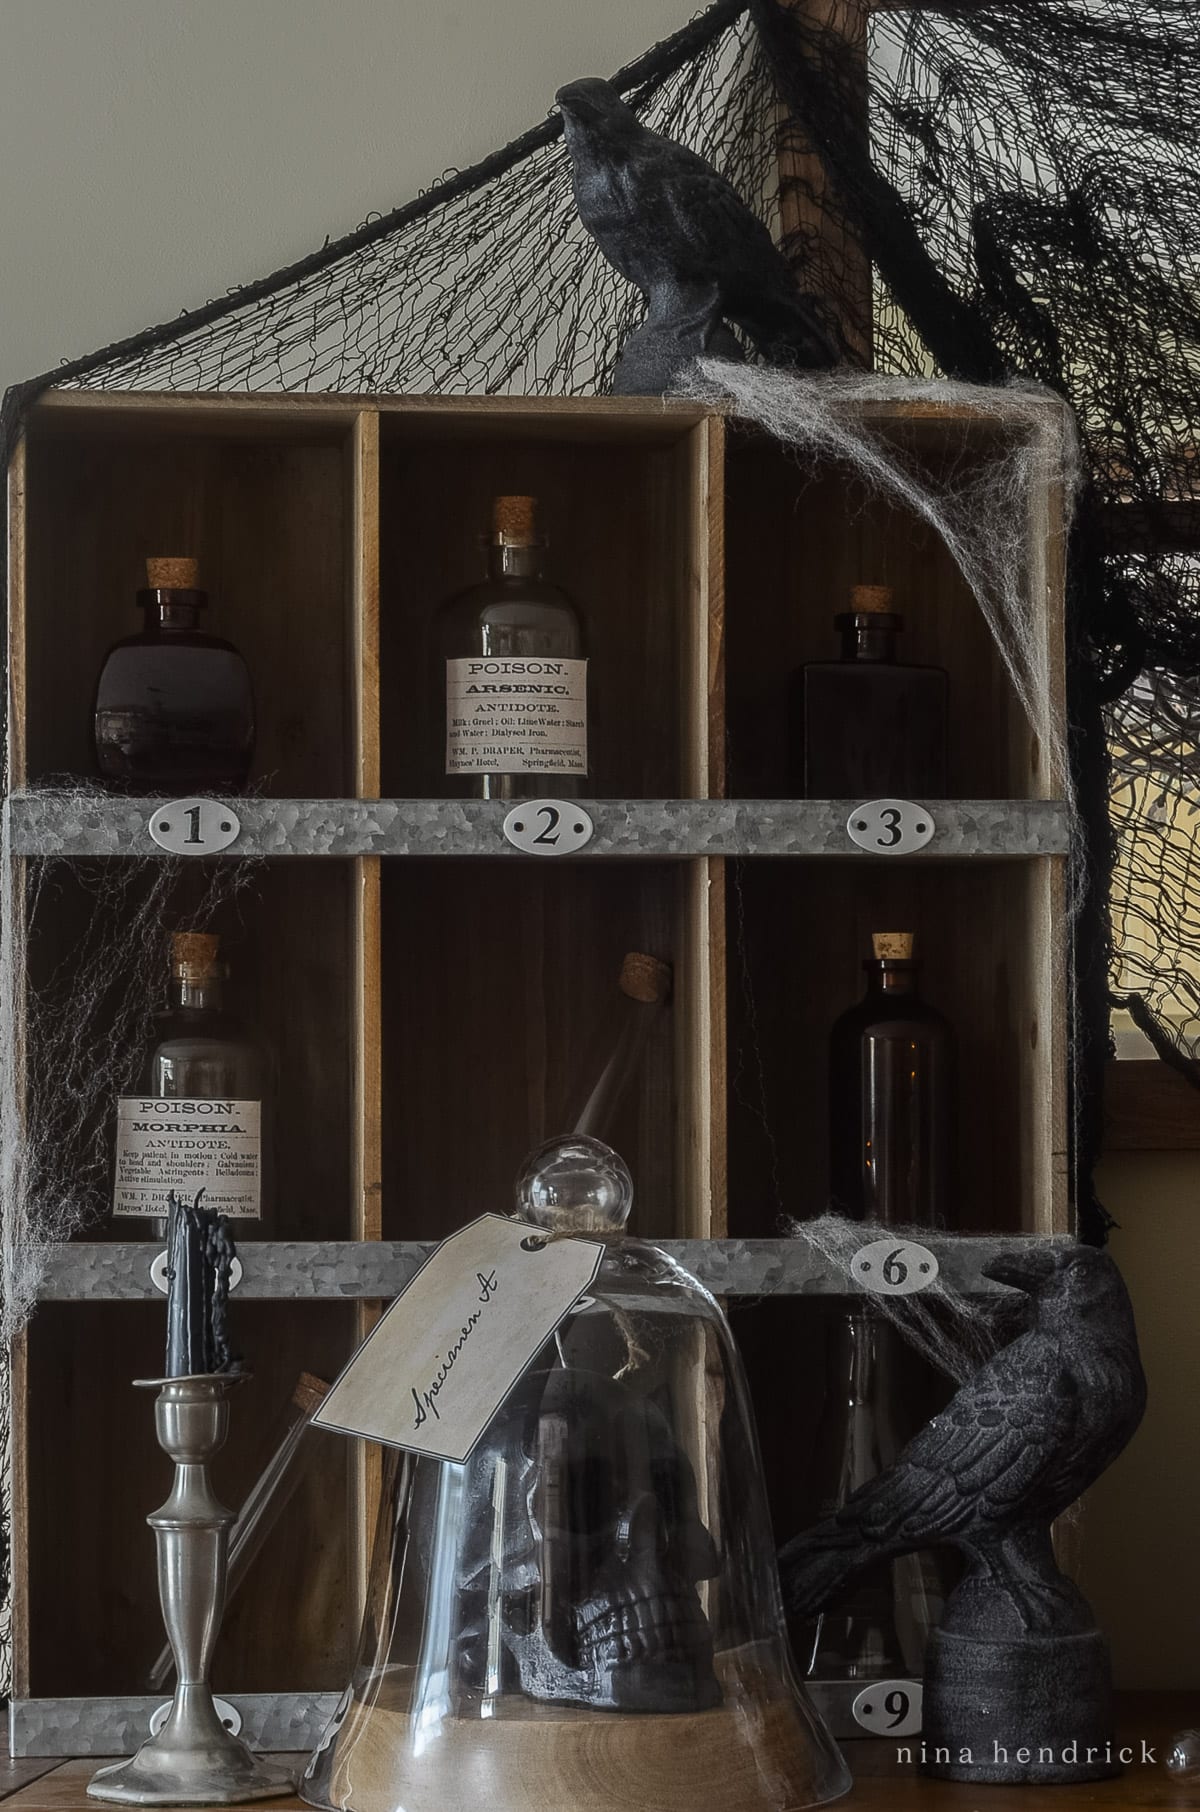 A spooky shelf with bottles and crows, perfect for Halloween decorating ideas.